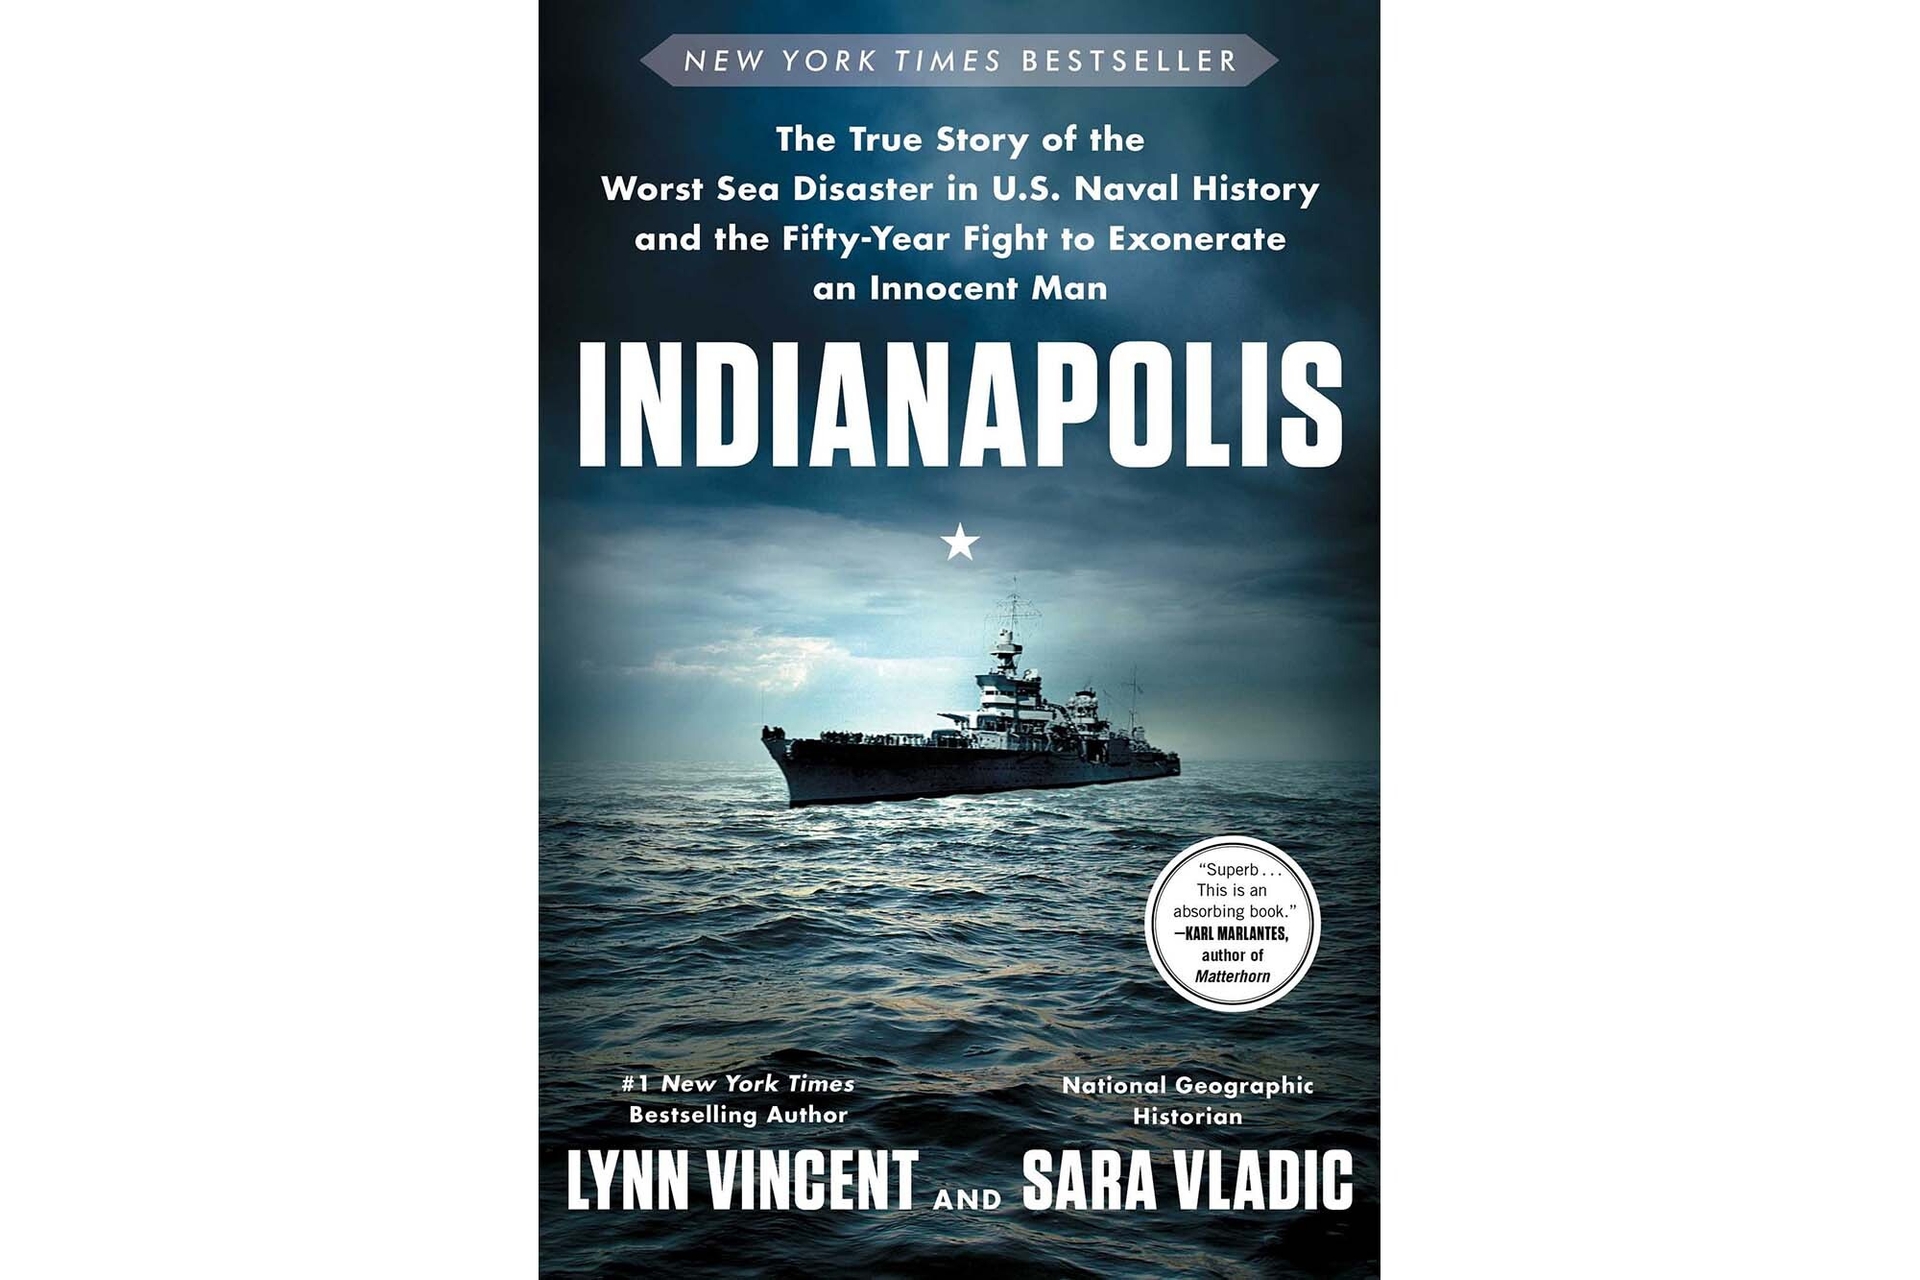 Best books of the year #3 pick, "Indianapolis," by Lynn Vincent and Sara Vladic. In the image, a military ship is in the middle of the ocean, the sky looks dark and soon-to-be stormy. 